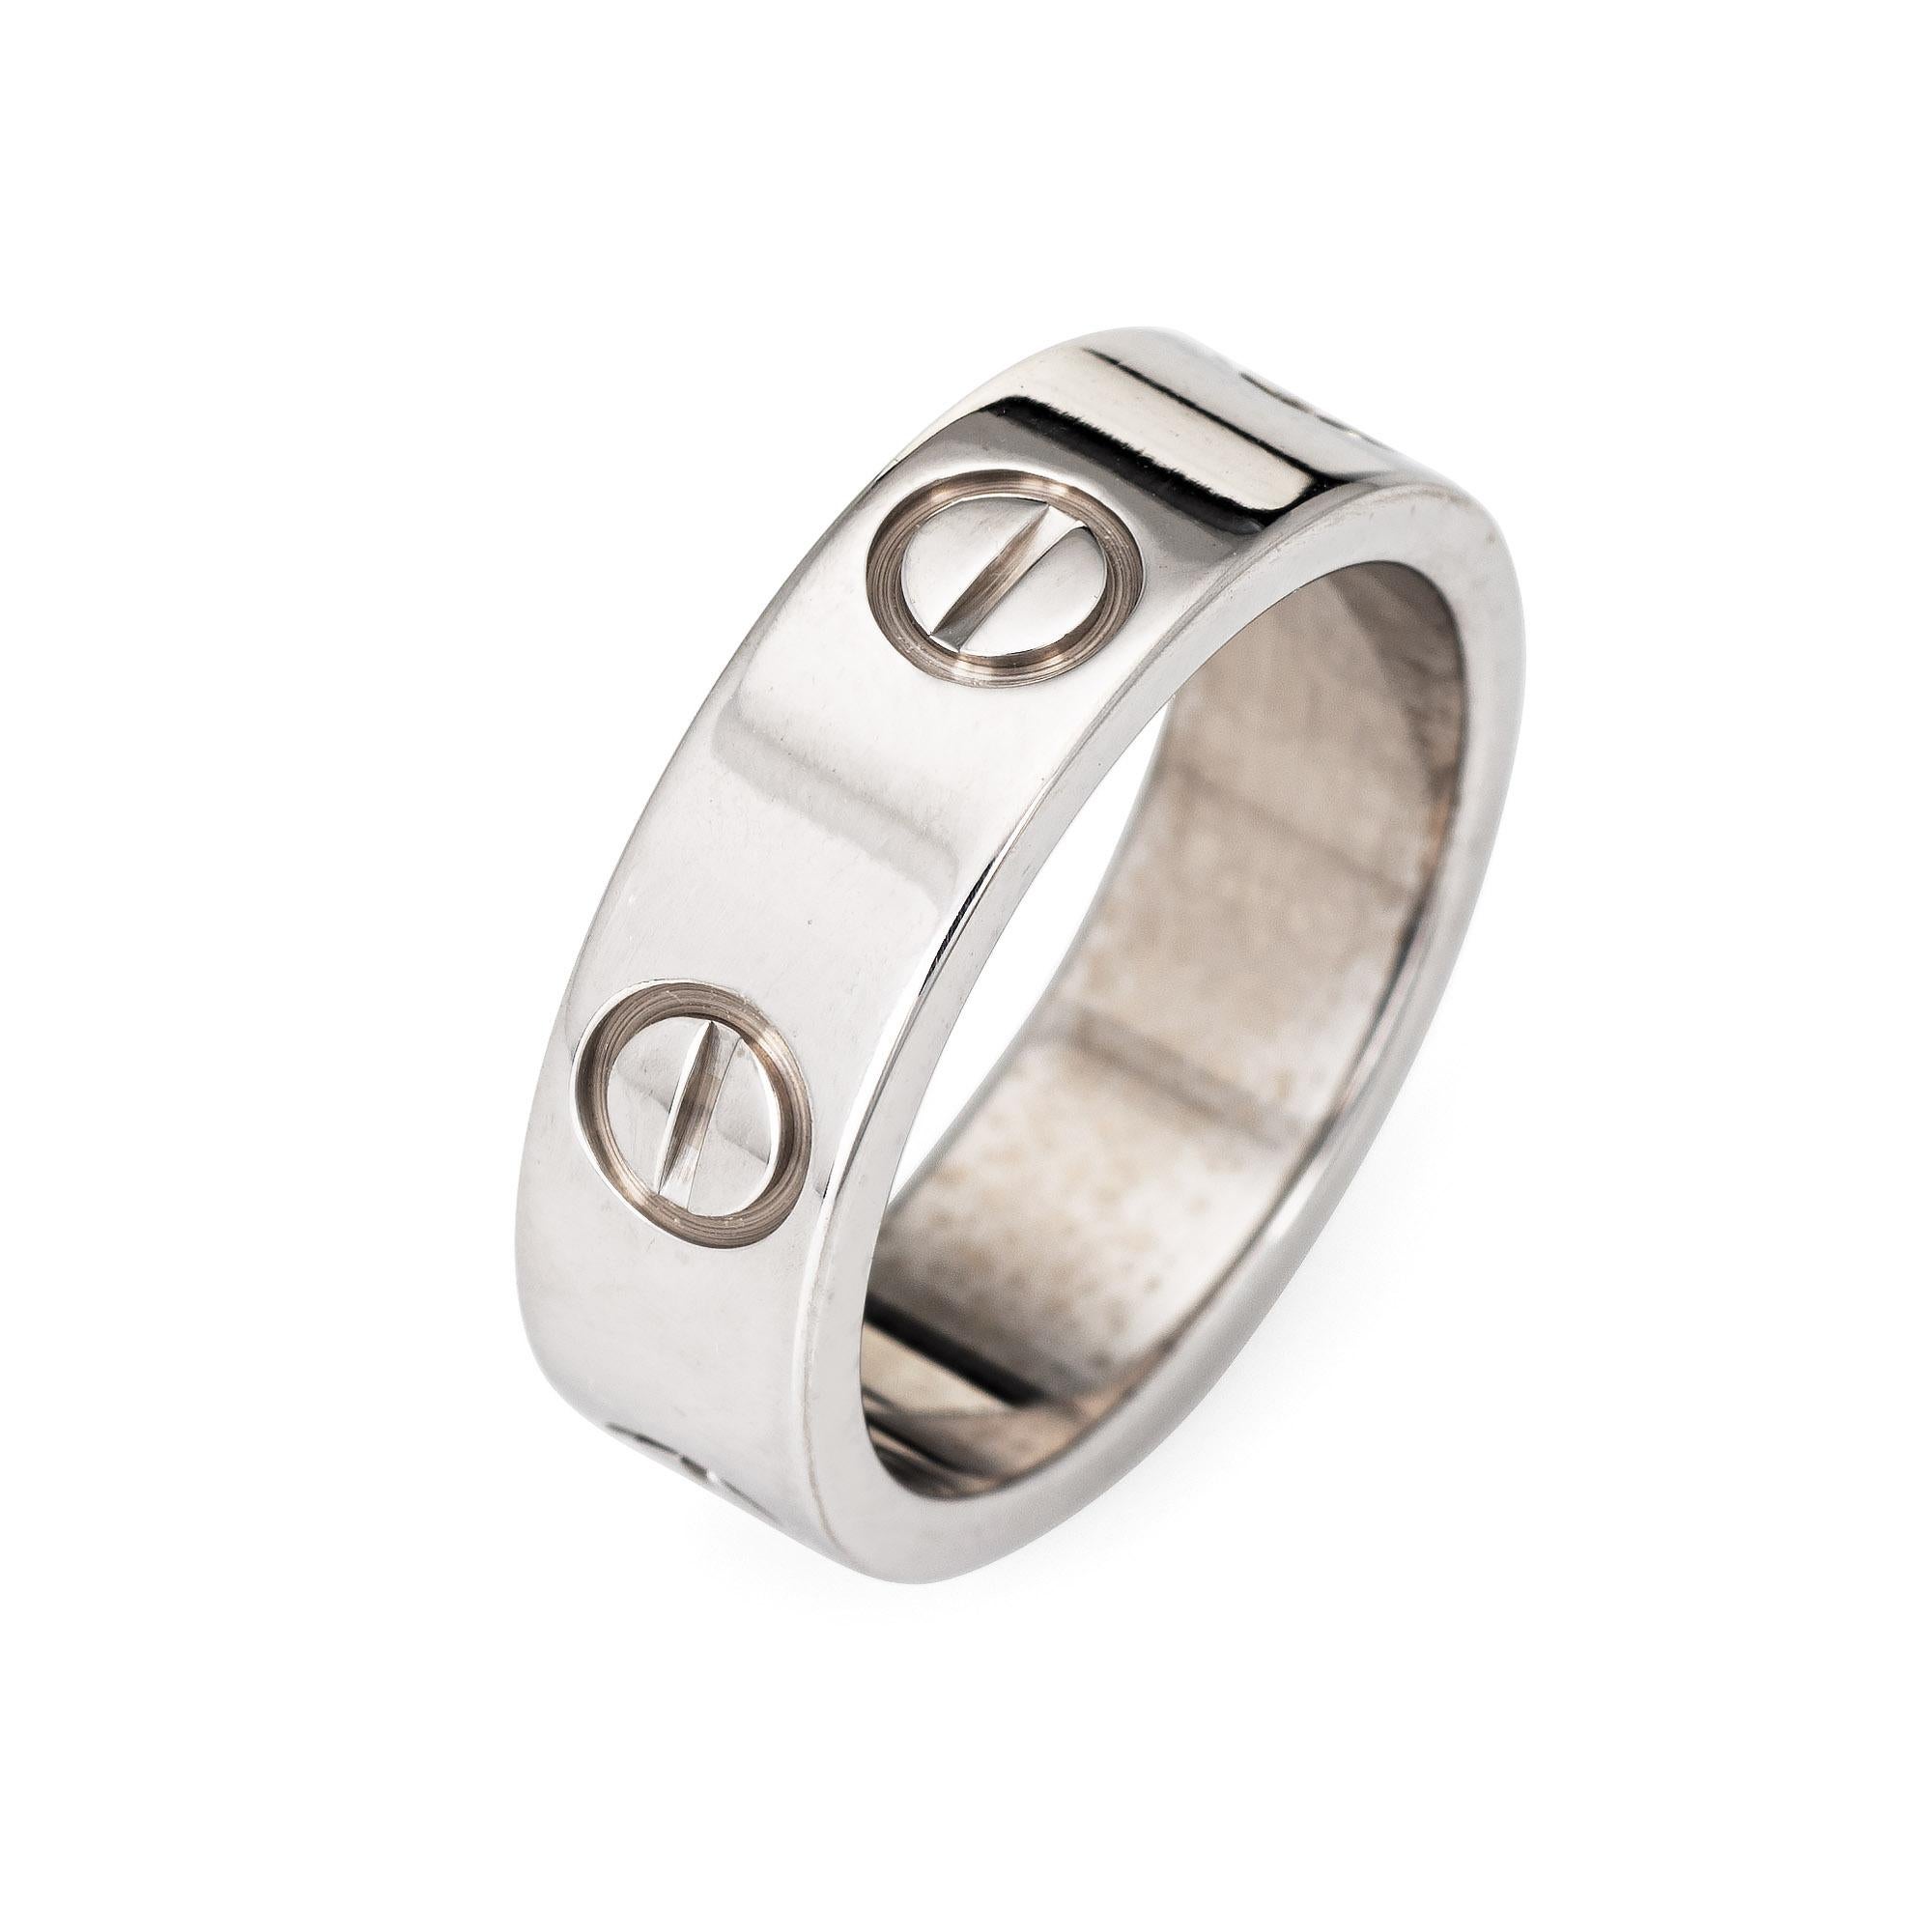 Cartier love wedding band crafted in 18 karat white gold.  

The ring currently retails for $1,840 (plus taxes).

The ring is in very good condition and was recently professionally cleaned and polished. Cartier box included.

Particulars:

Weight: